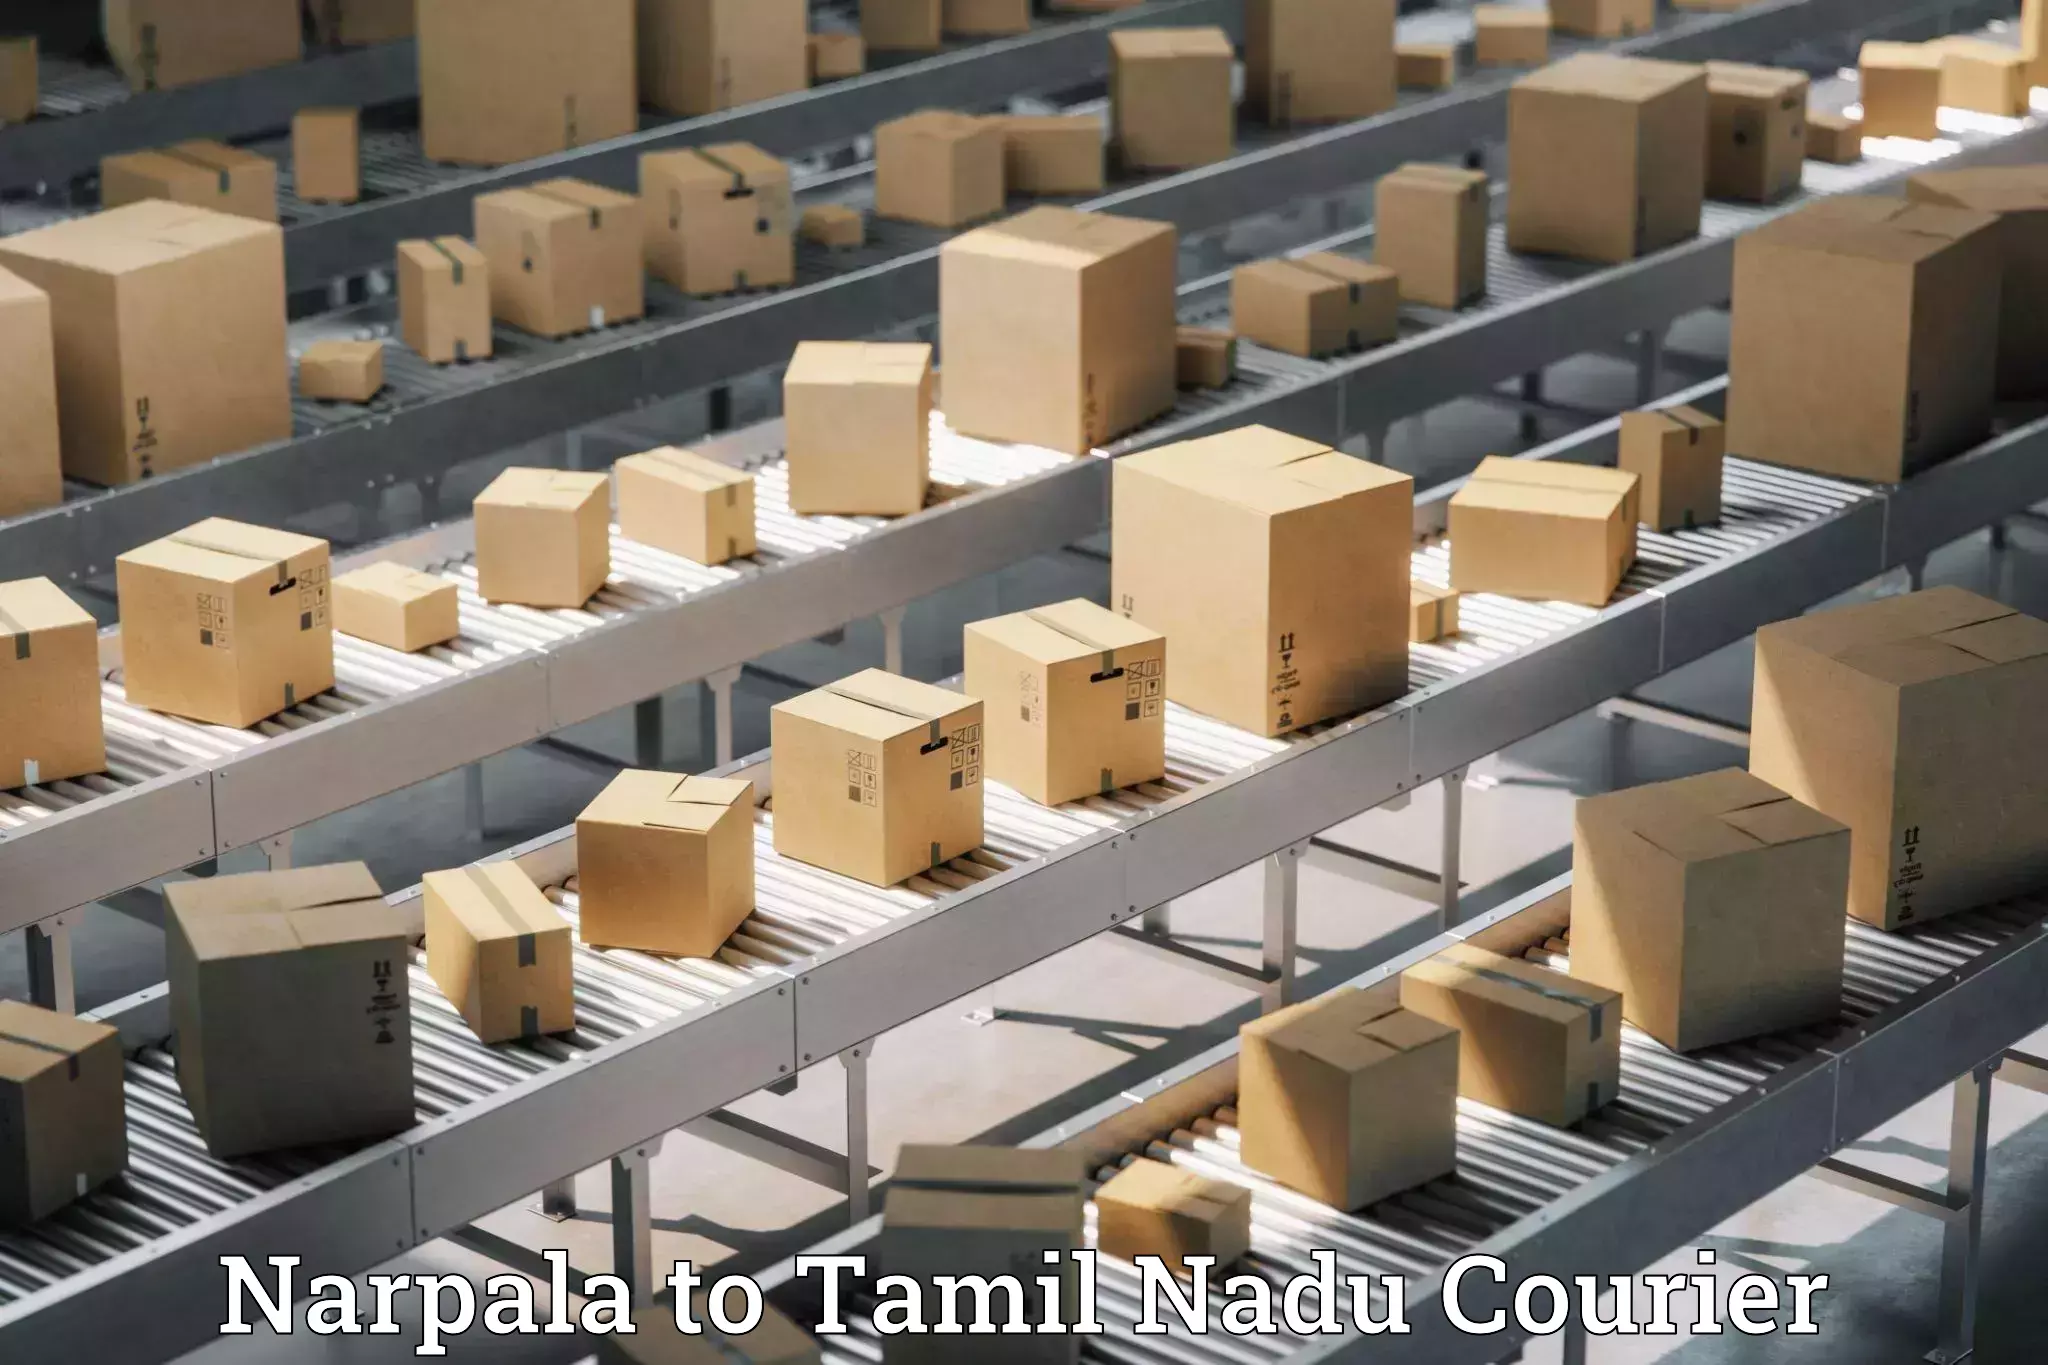 Seamless shipping experience Narpala to Vriddhachalam